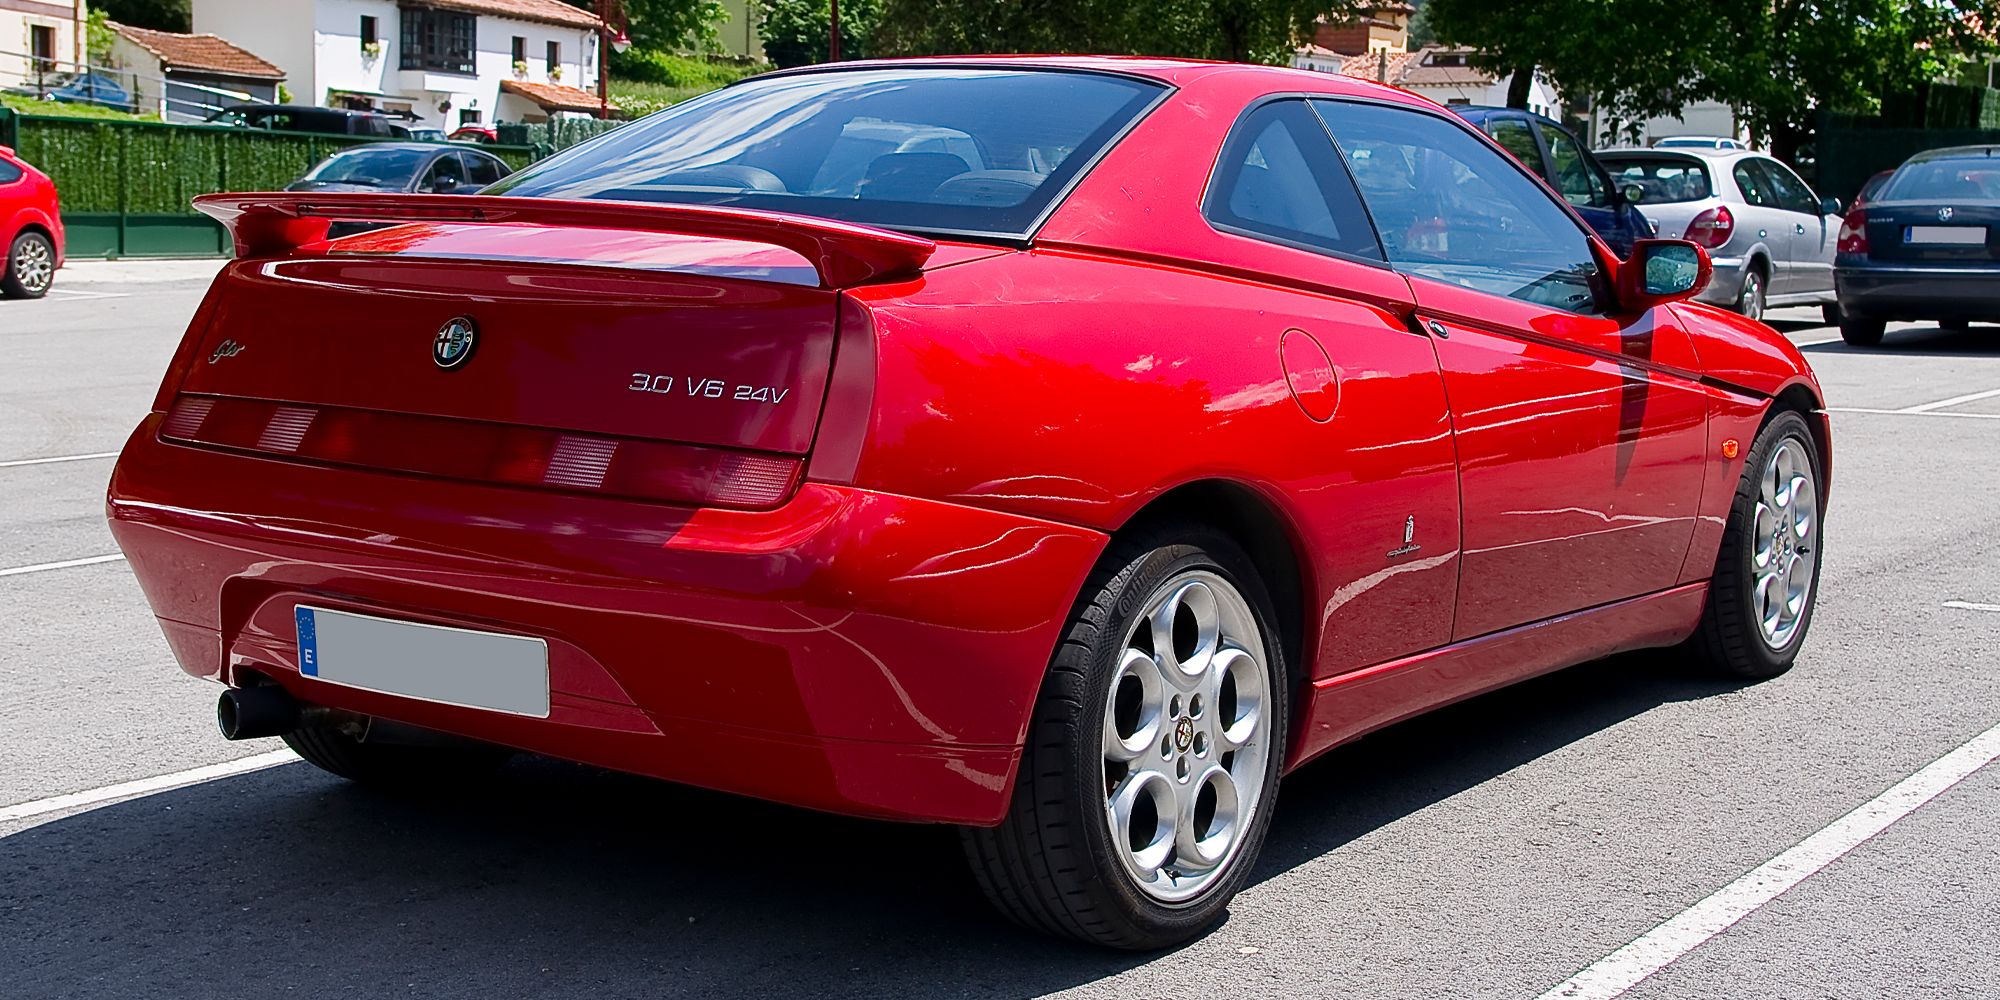 The rear of the GTV